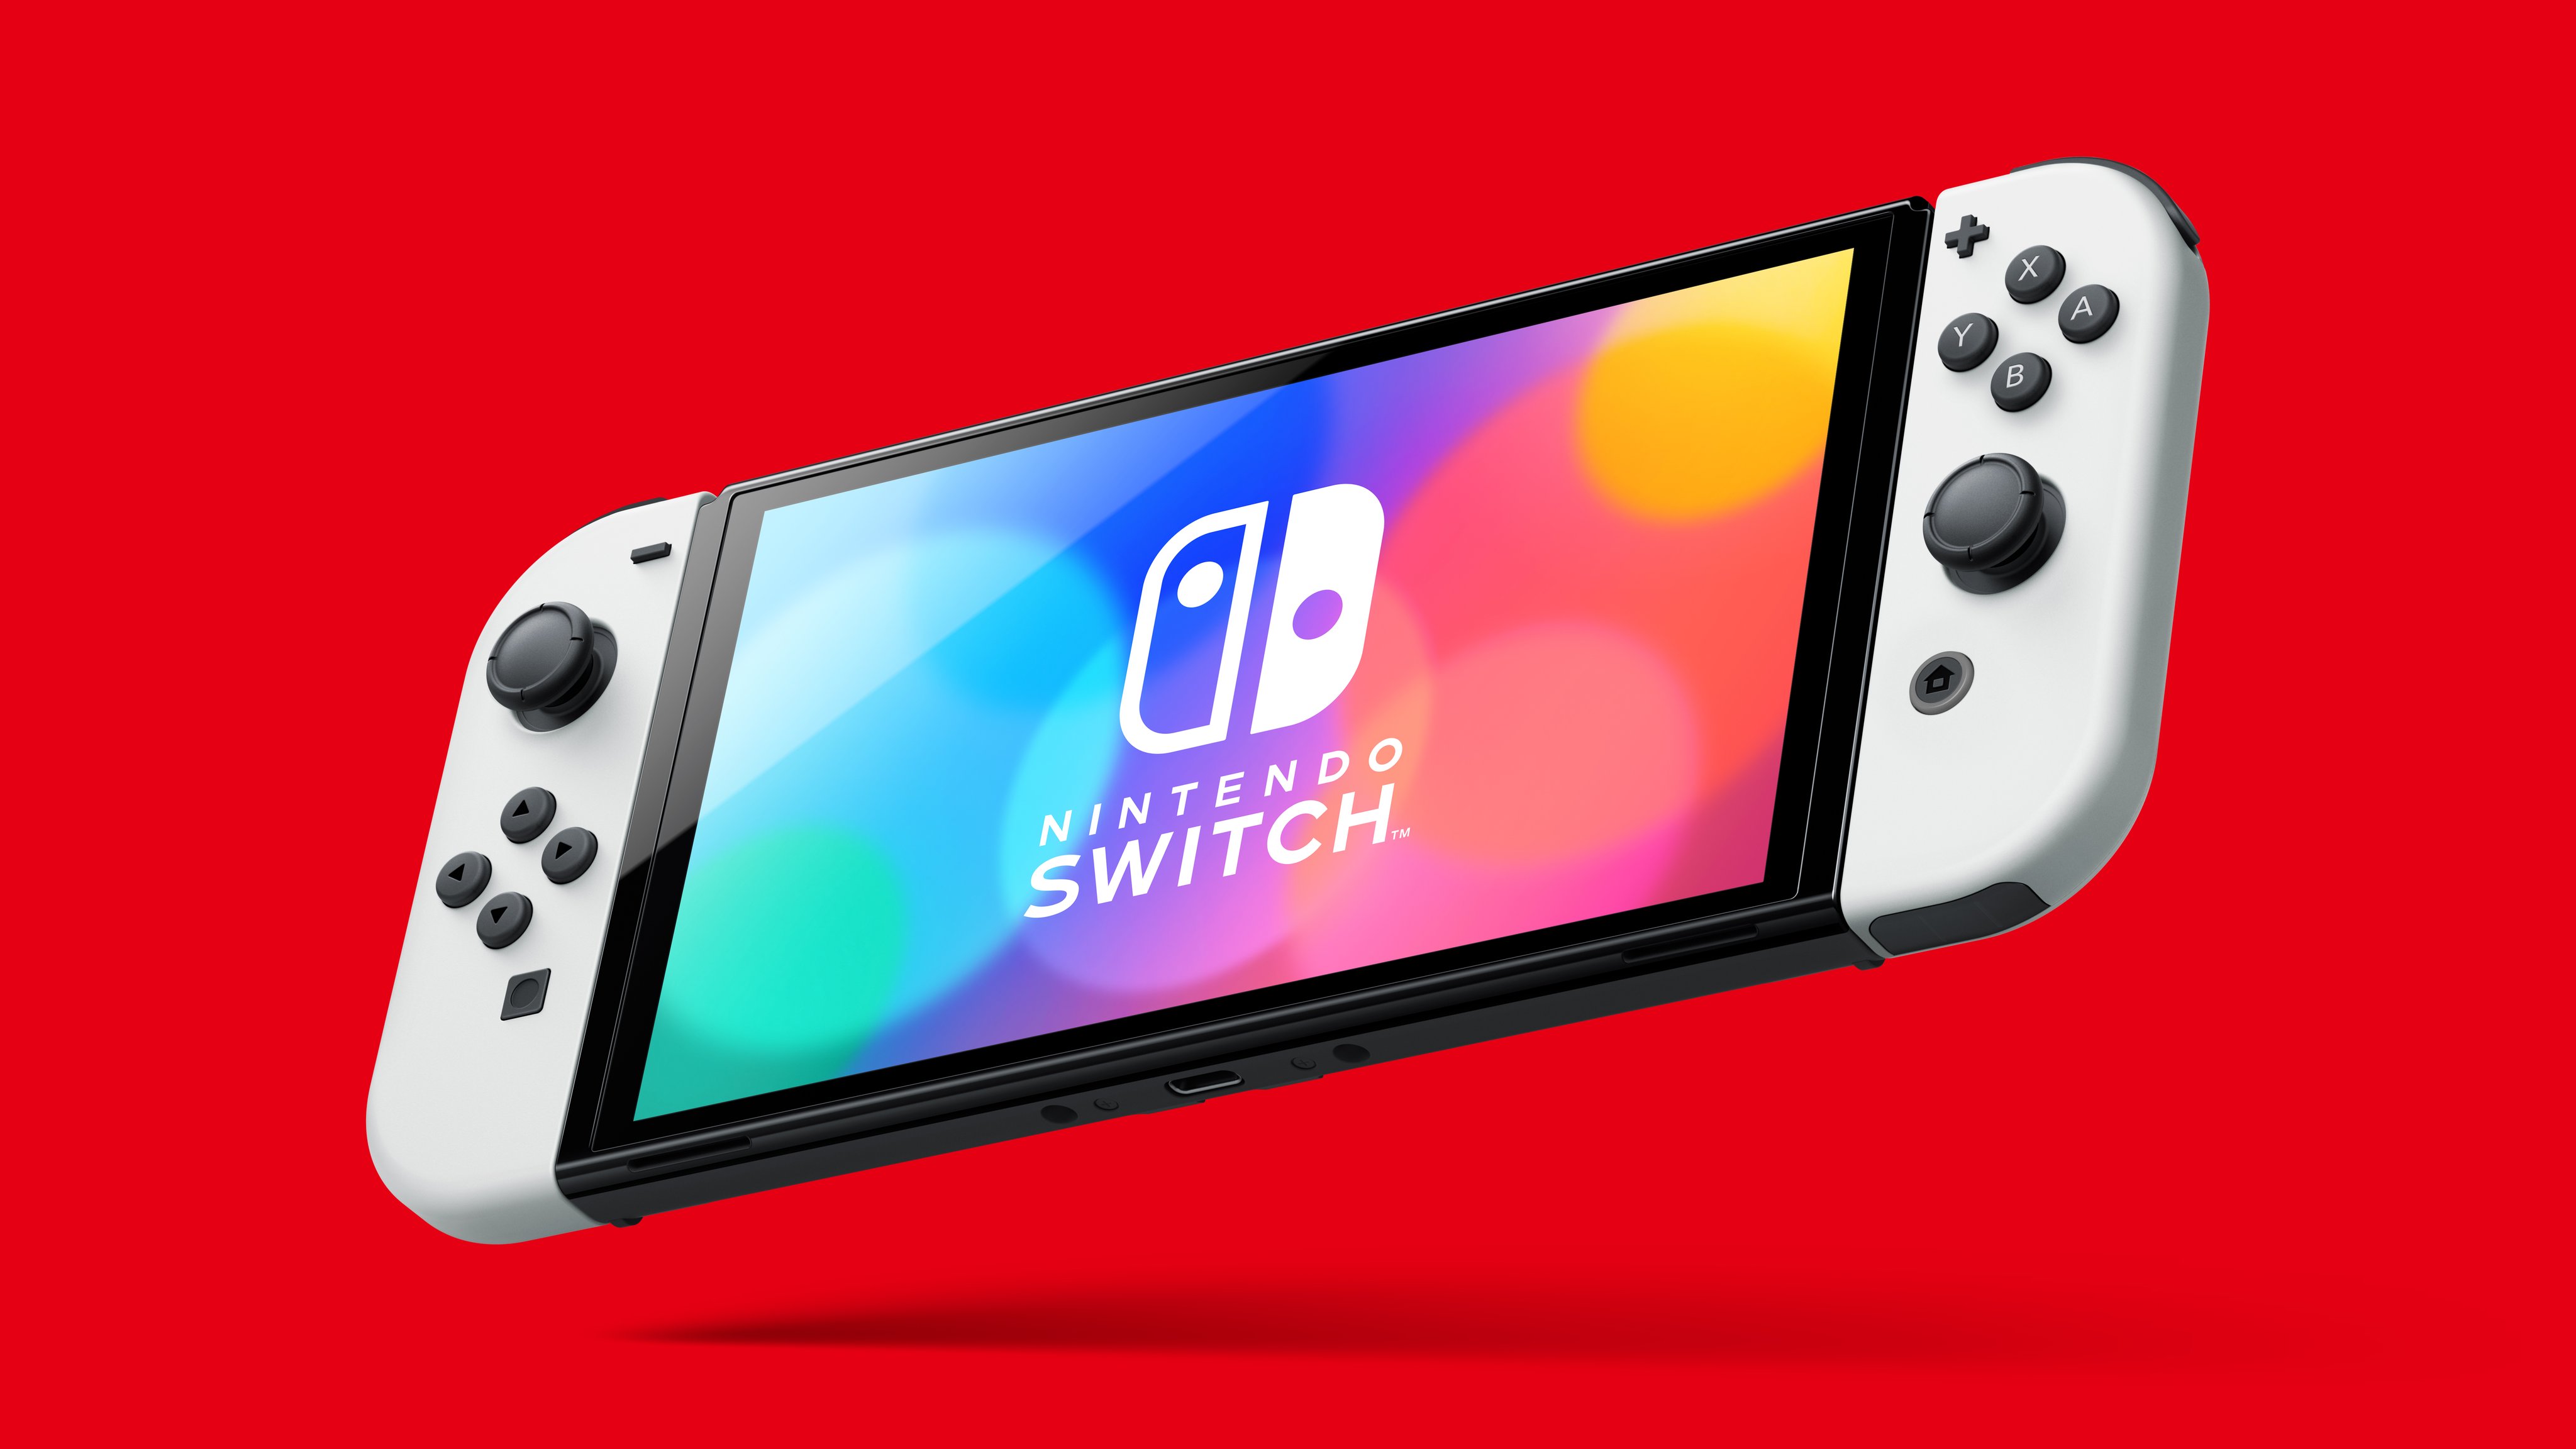 Nintendo Switch vs Switch OLED vs Switch Lite: What's the difference?